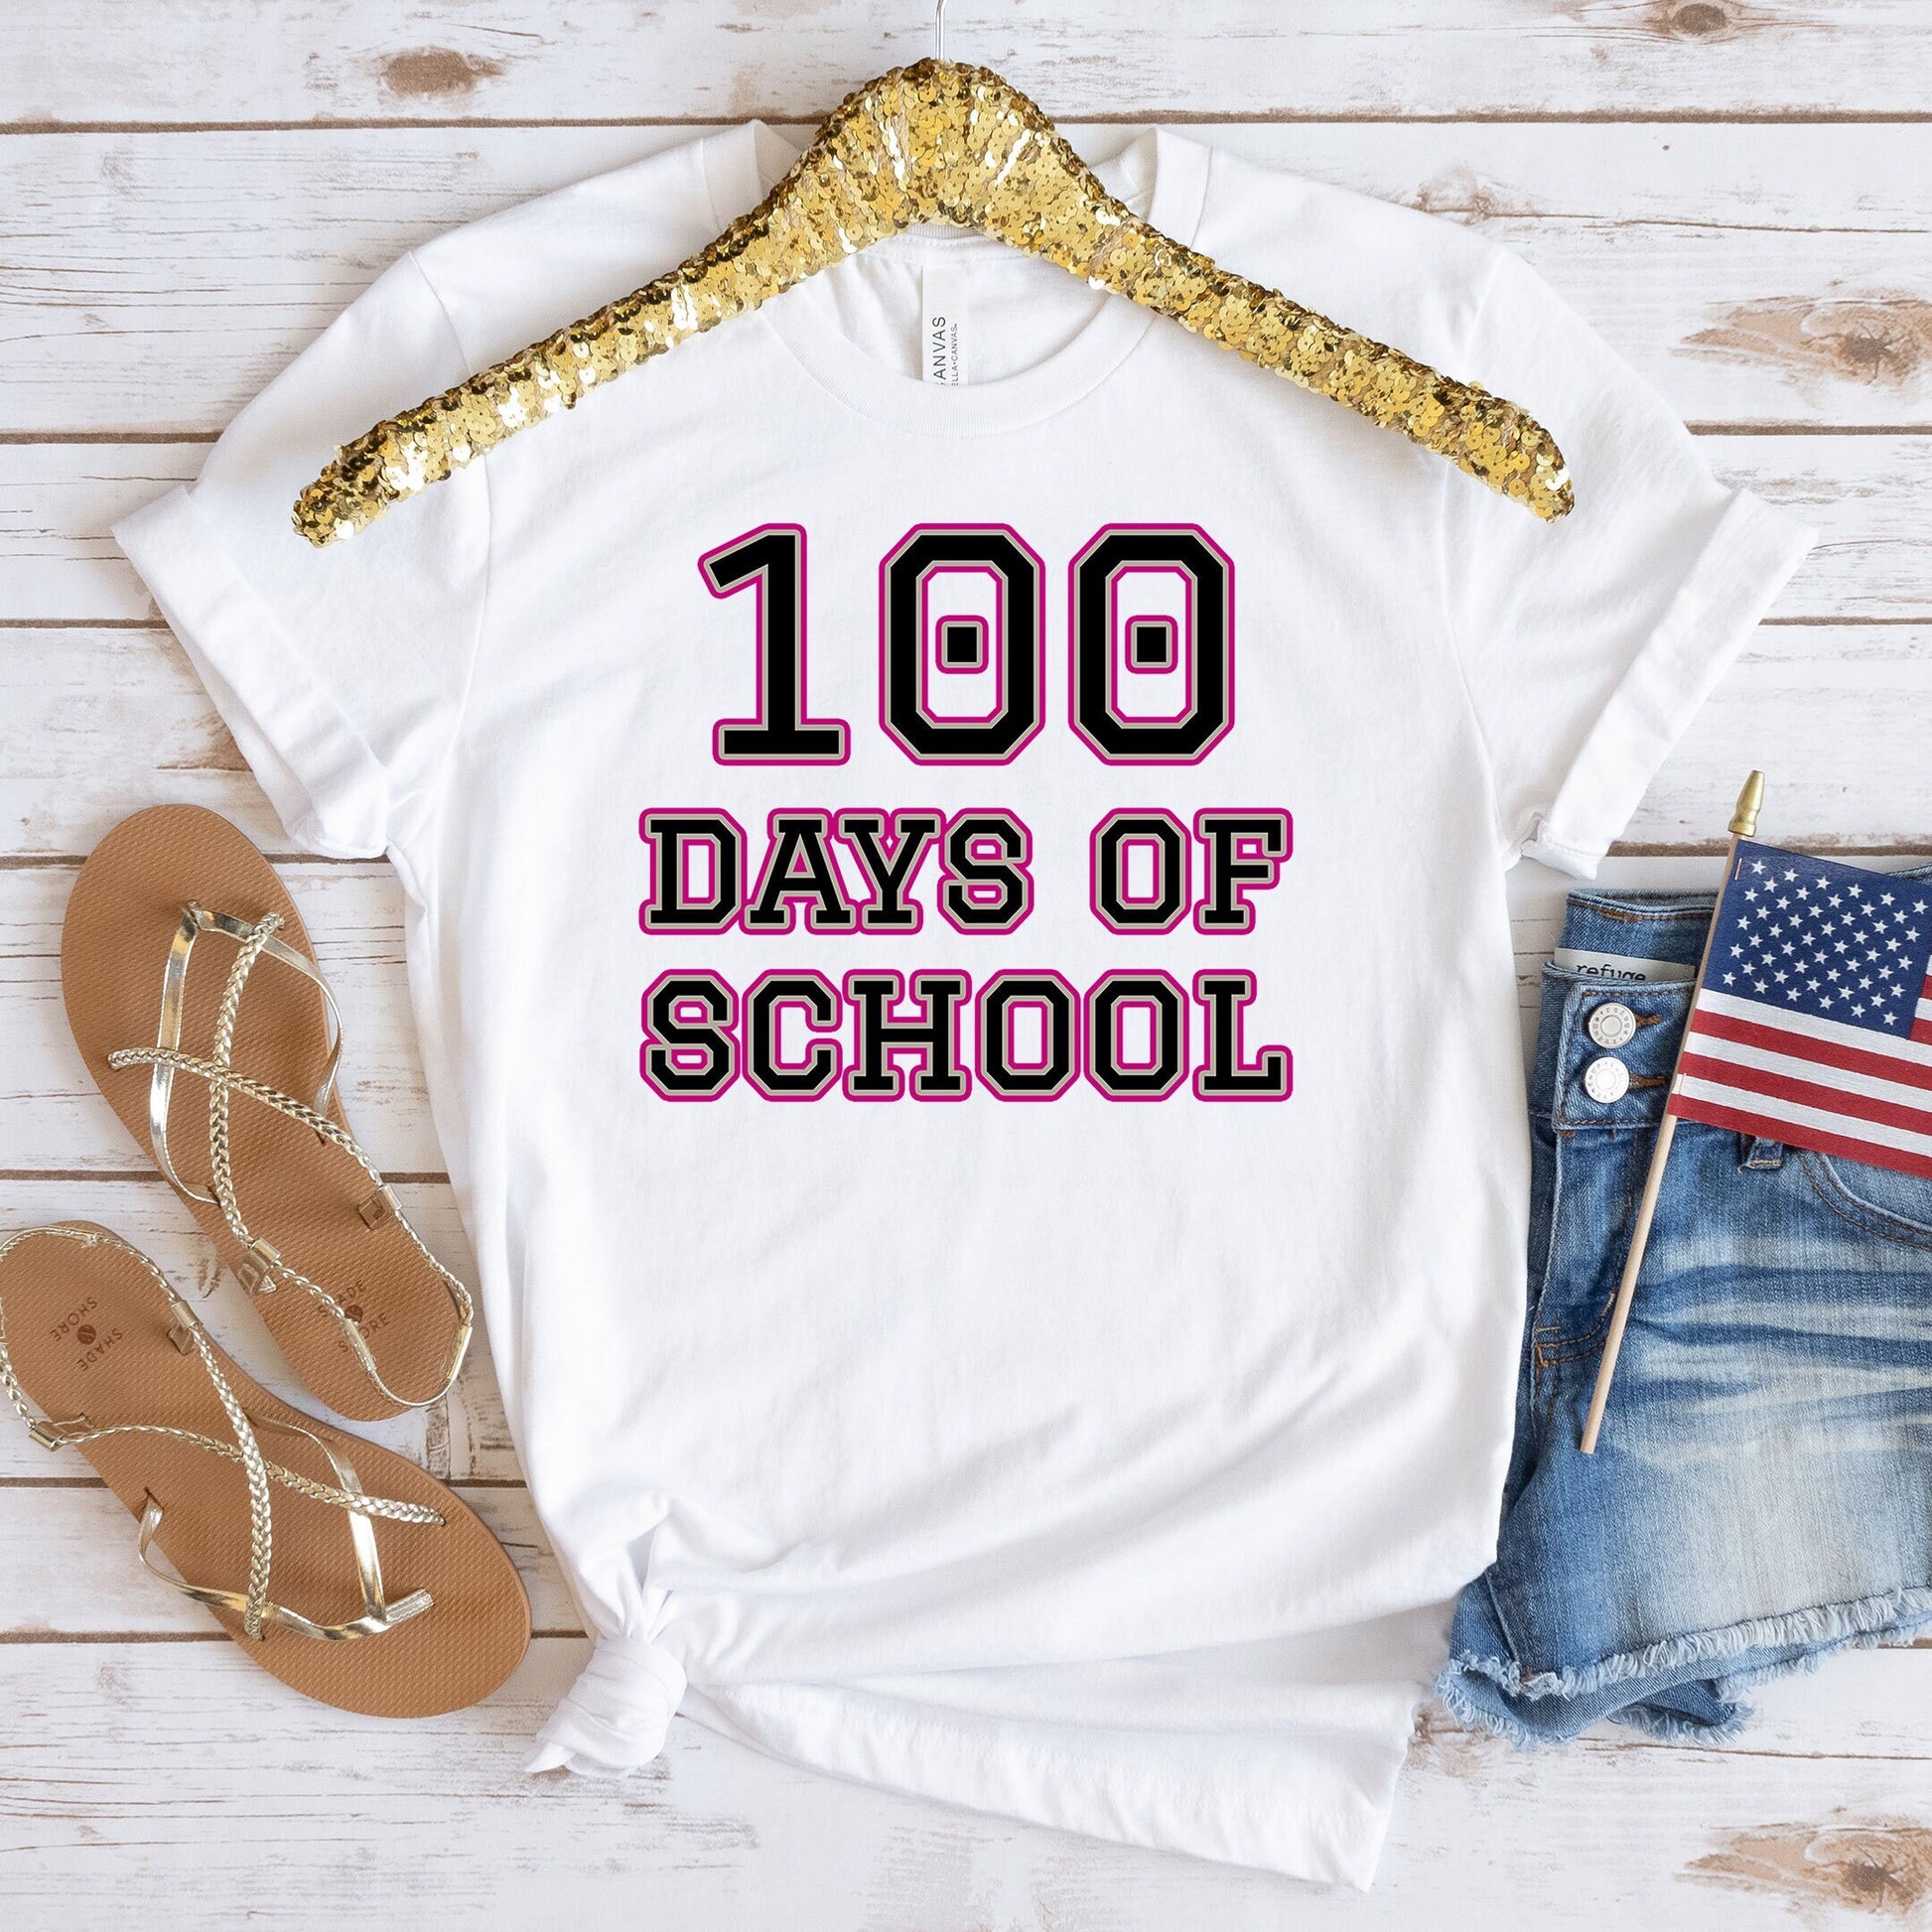 100 Day Shirt, 100 Day of School Shirt, Teacher 100 Day T-Shirt Hundred 100th Day of School Tee Girls 100 Day Smarter 100th Day Kinder Pre-k